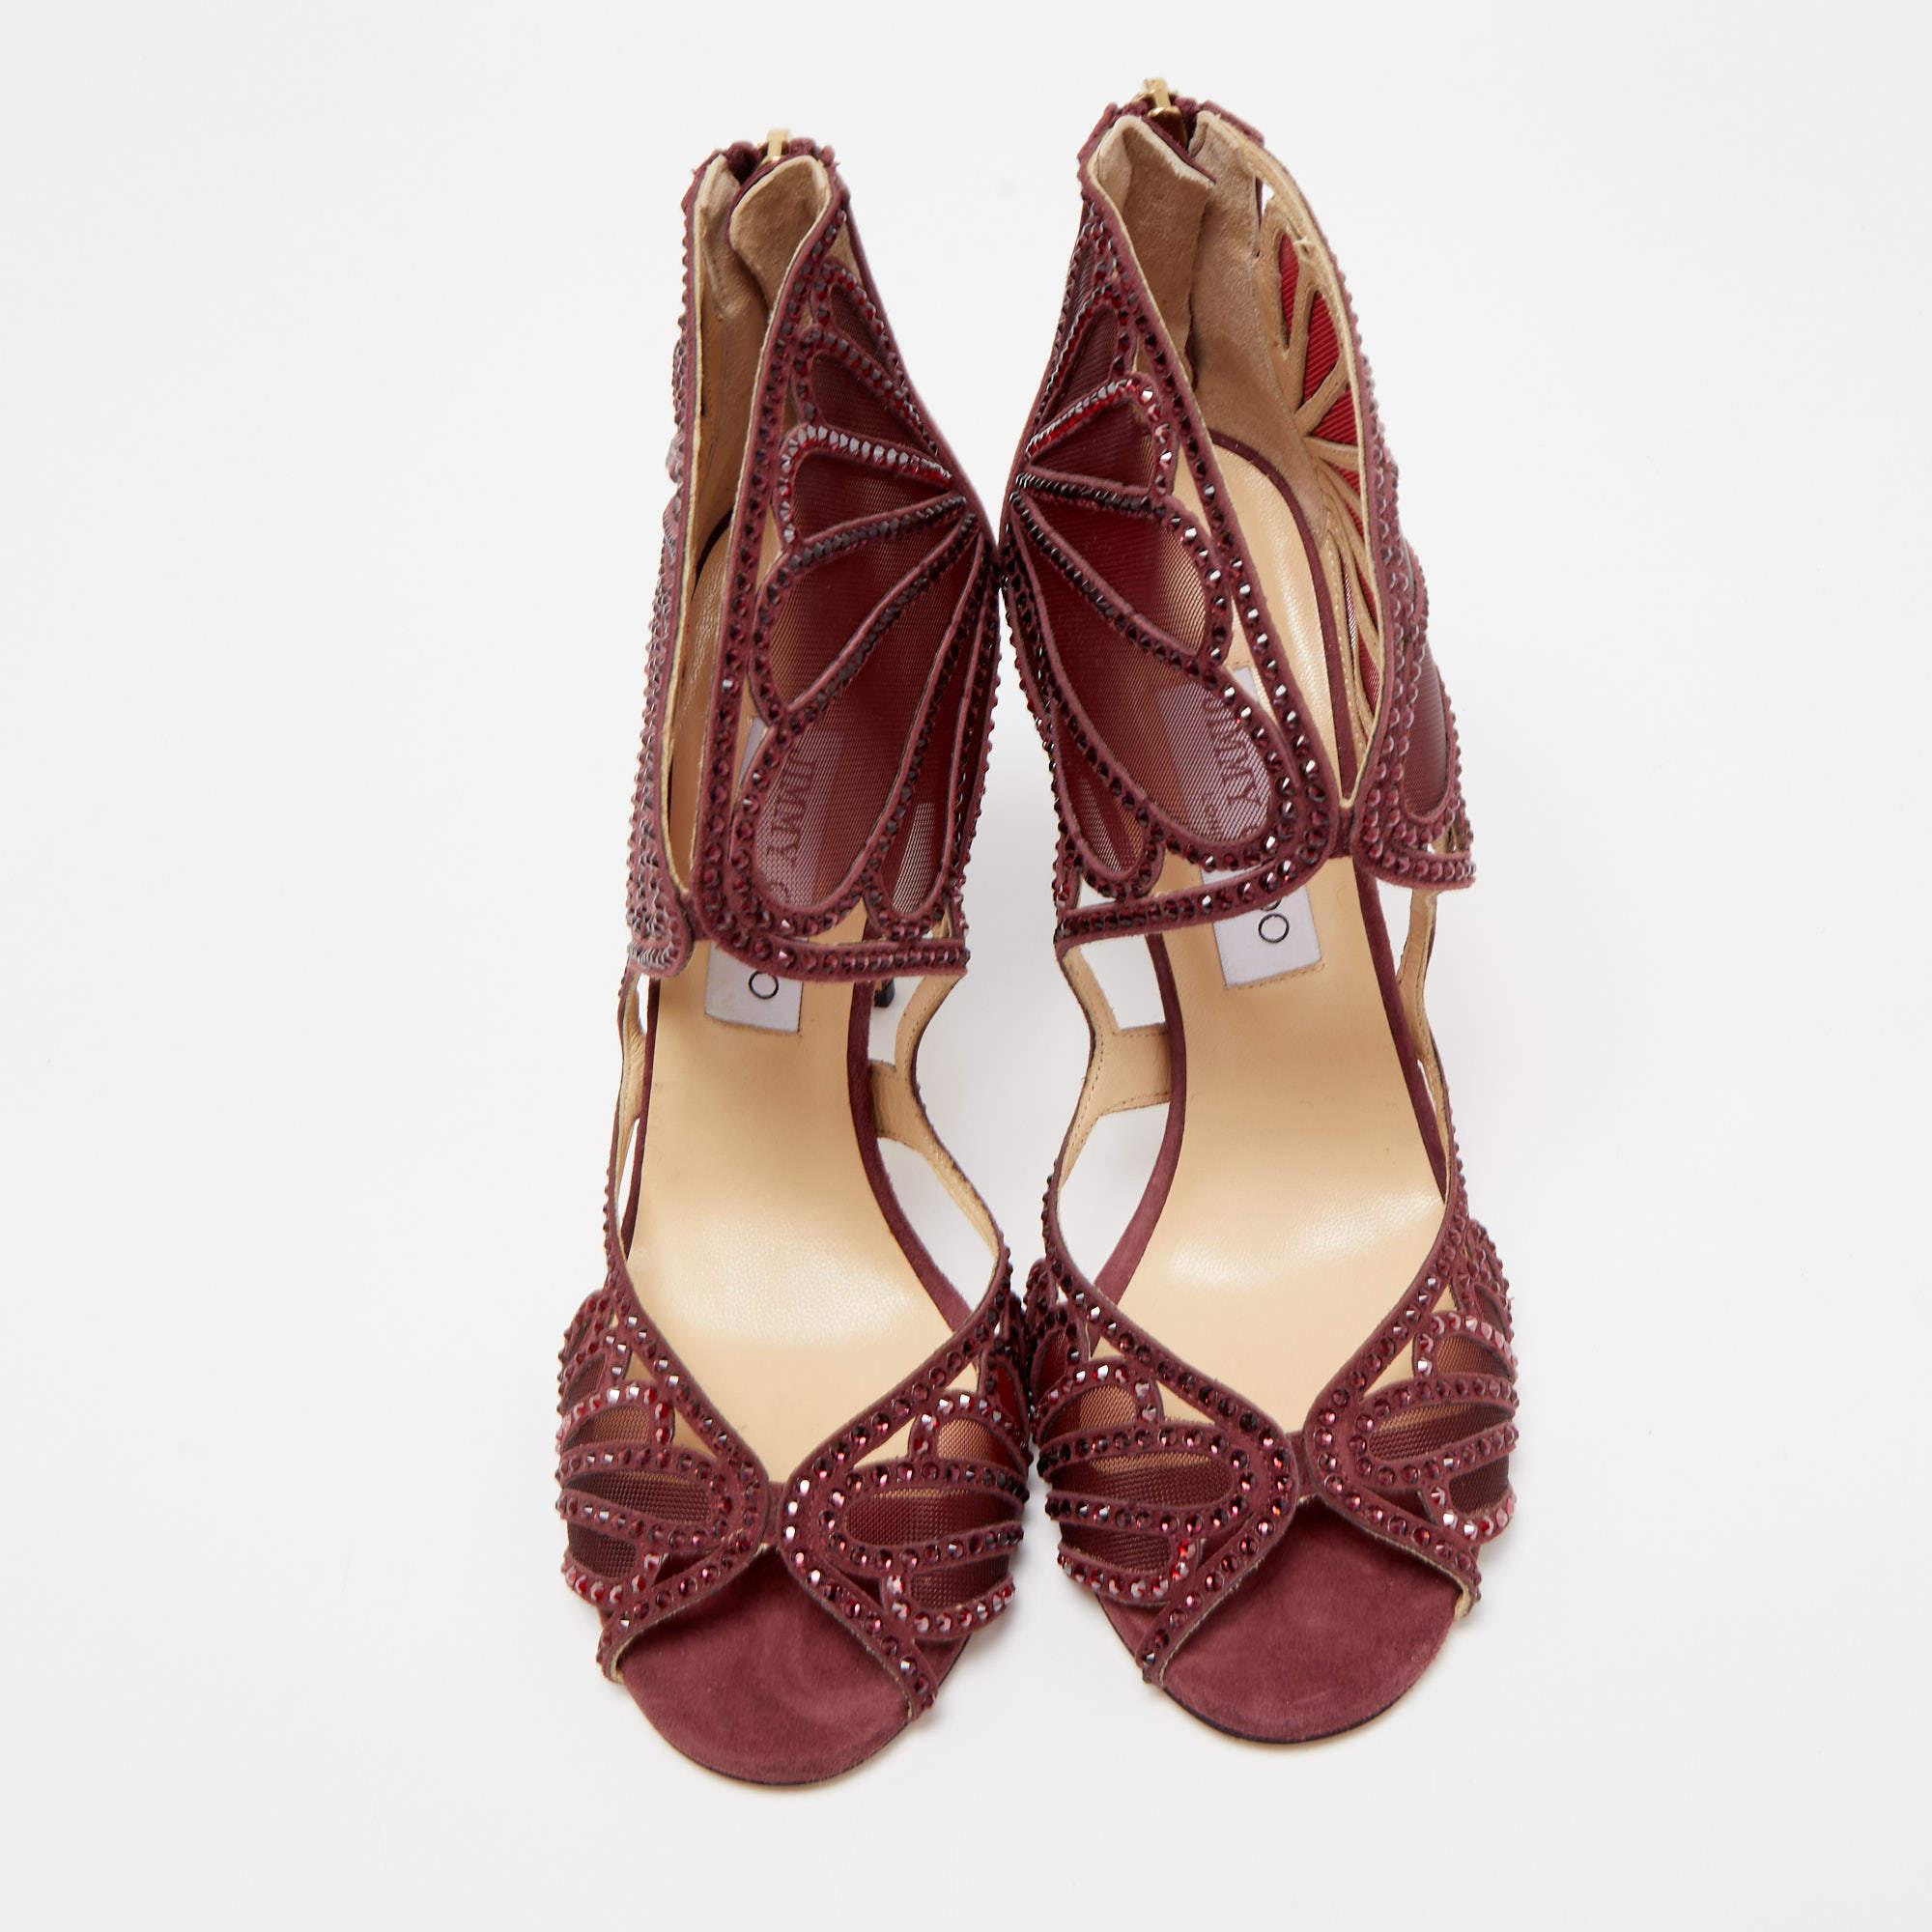 These Jimmy Choo sandals will frame your feet in an elegant manner. Crafted from quality materials, they flaunt a classy display, comfortable insoles & durable heels.

